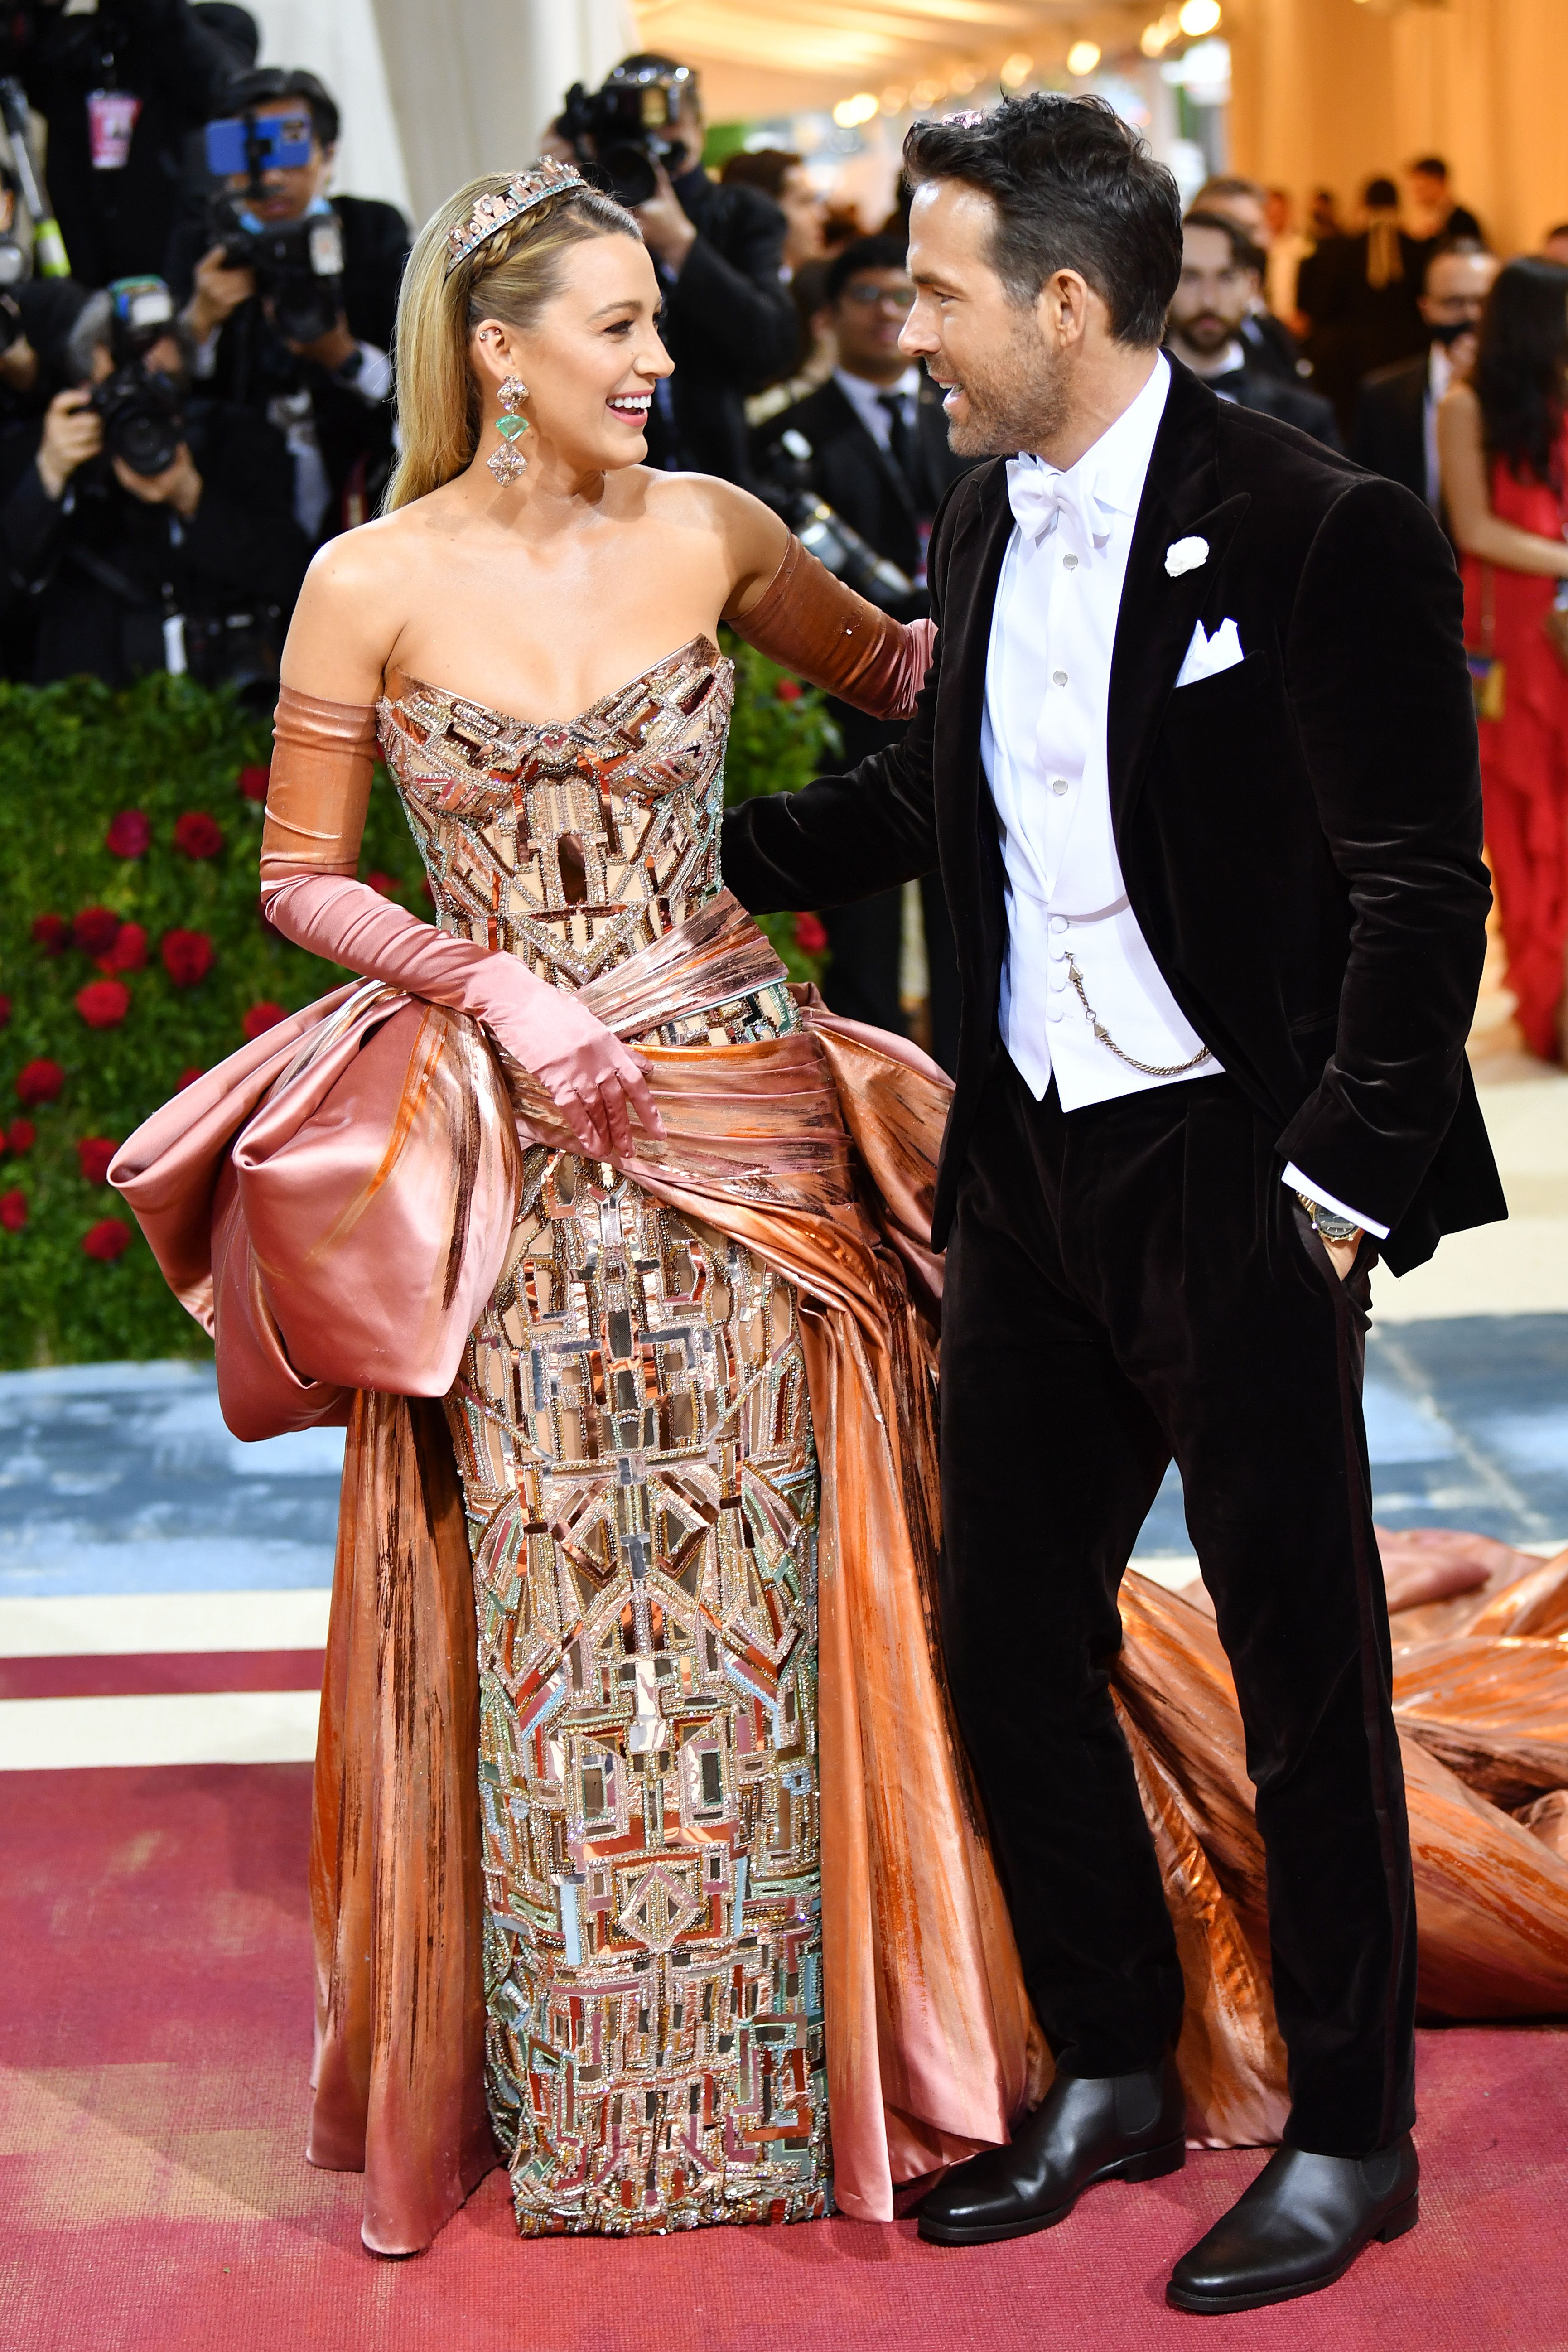 Met Gala 2022: Blake Lively and Ryan Reynolds' All-Time Best Looks